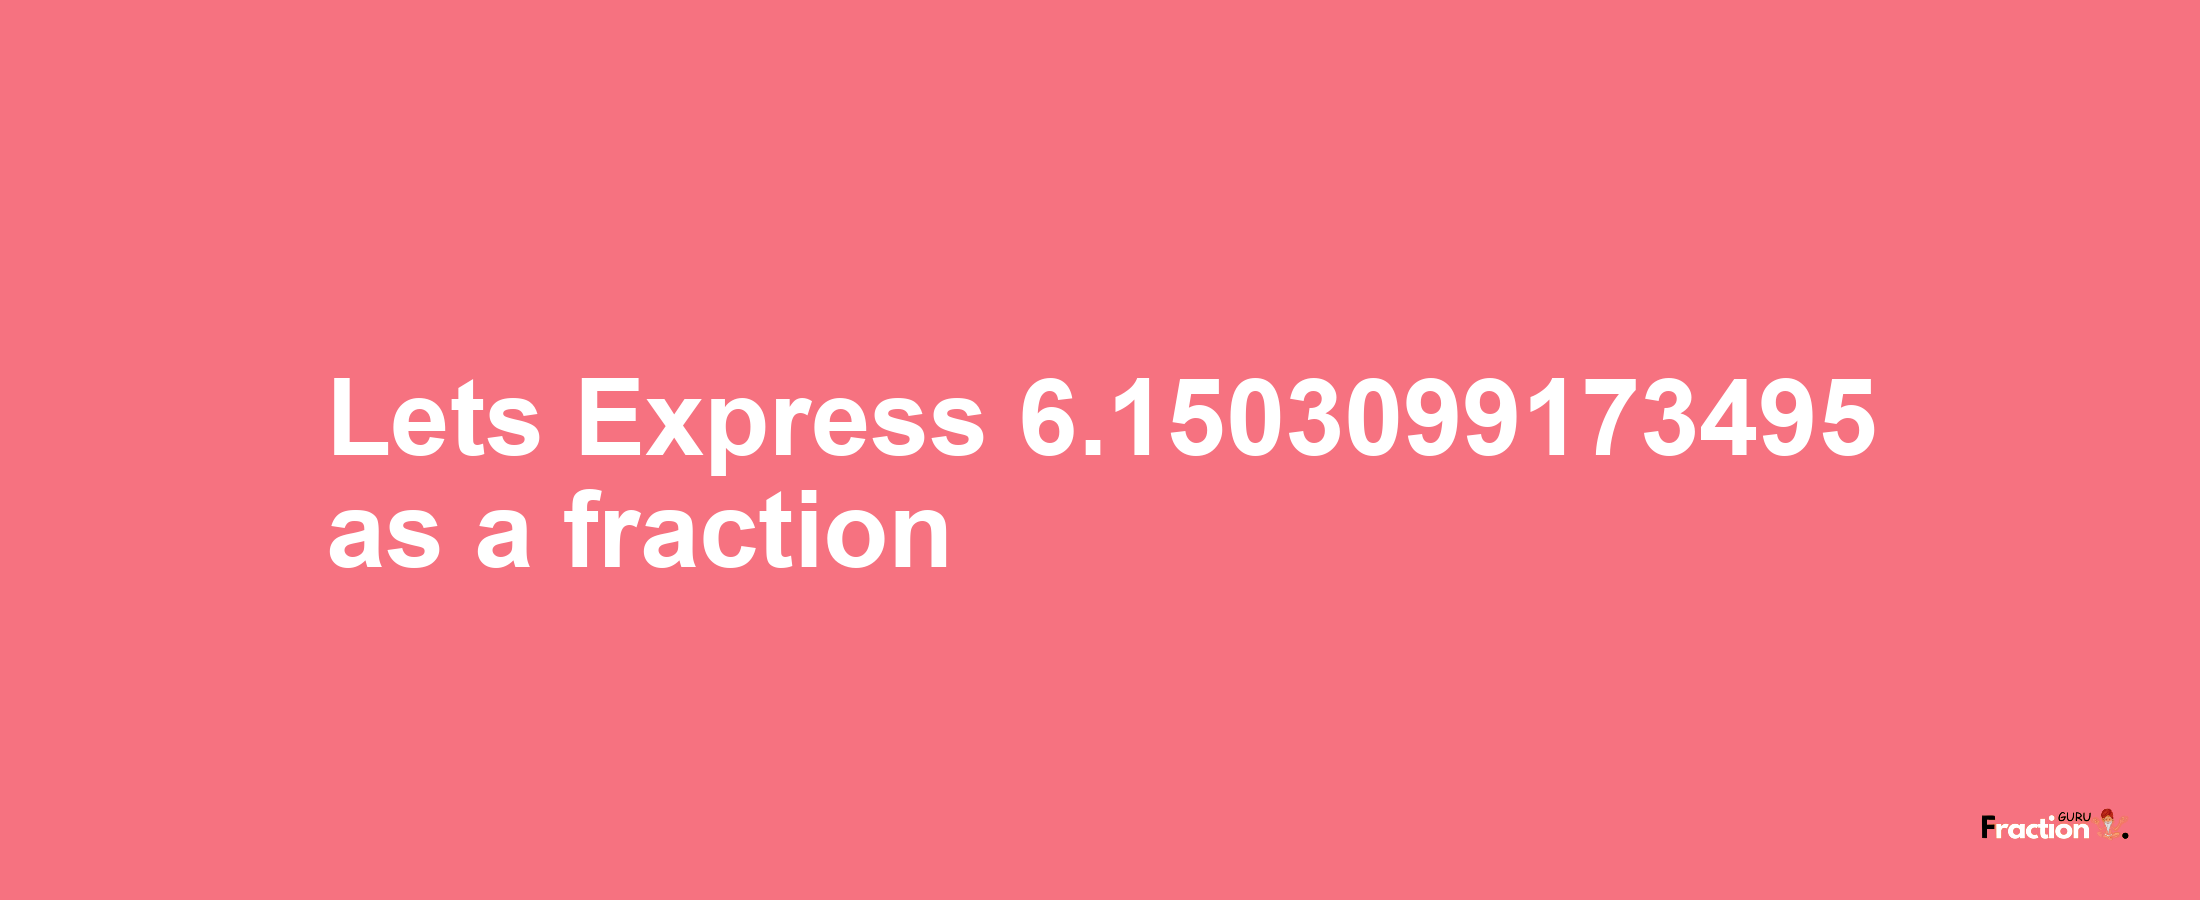 Lets Express 6.1503099173495 as afraction